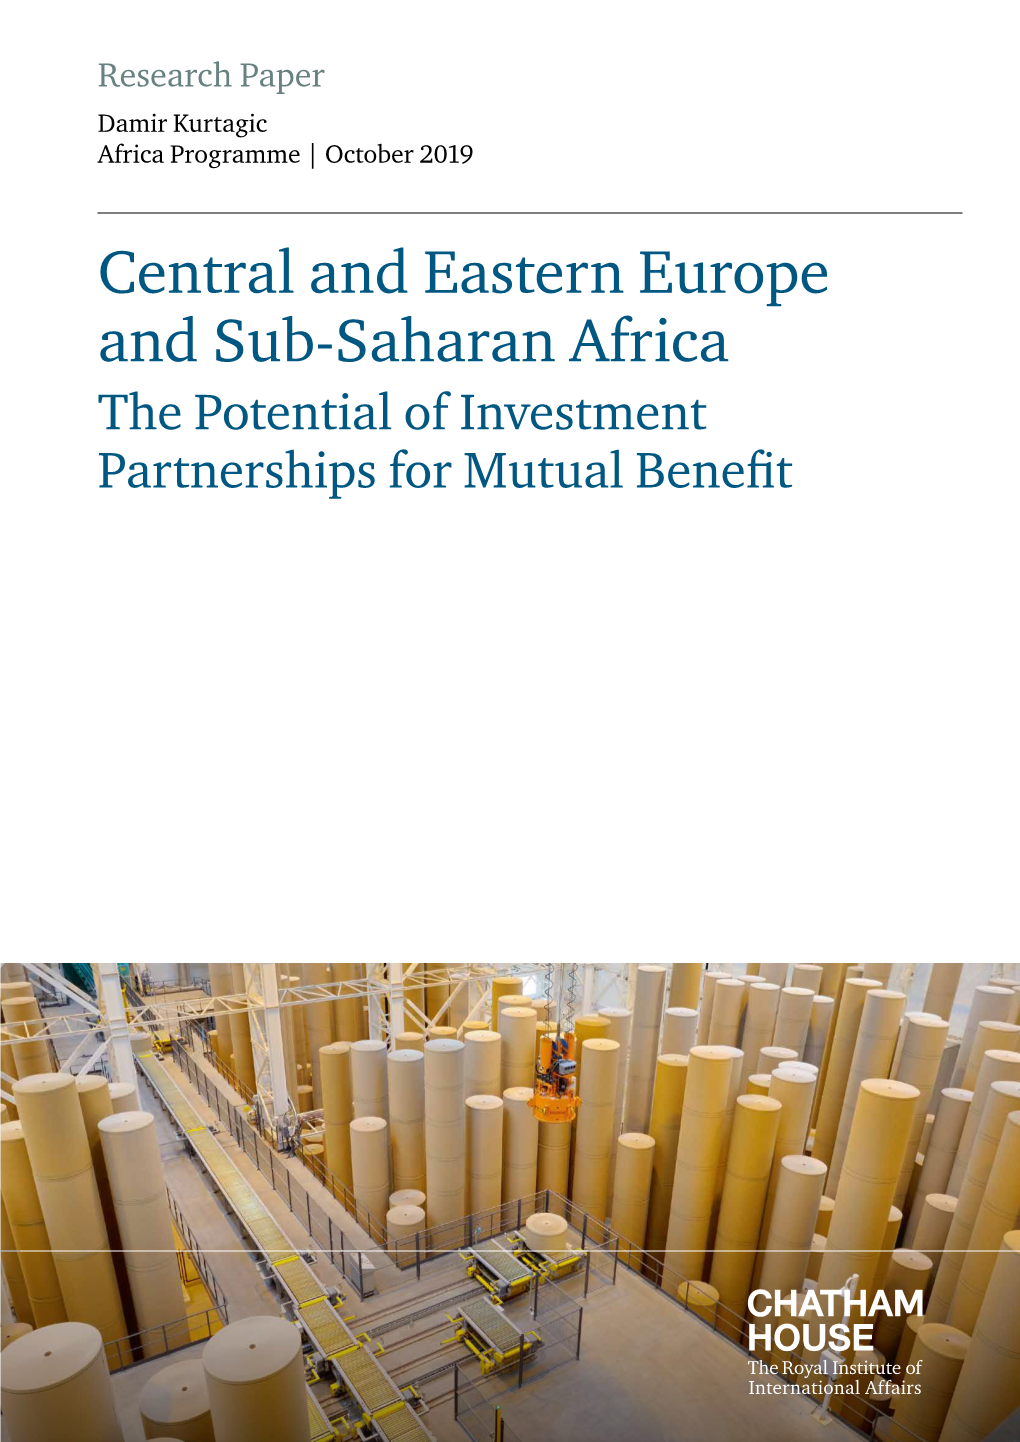 Central and Eastern Europe and Sub-Saharan Africa the Potential of Investment Partnerships for Mutual Benefit Contents